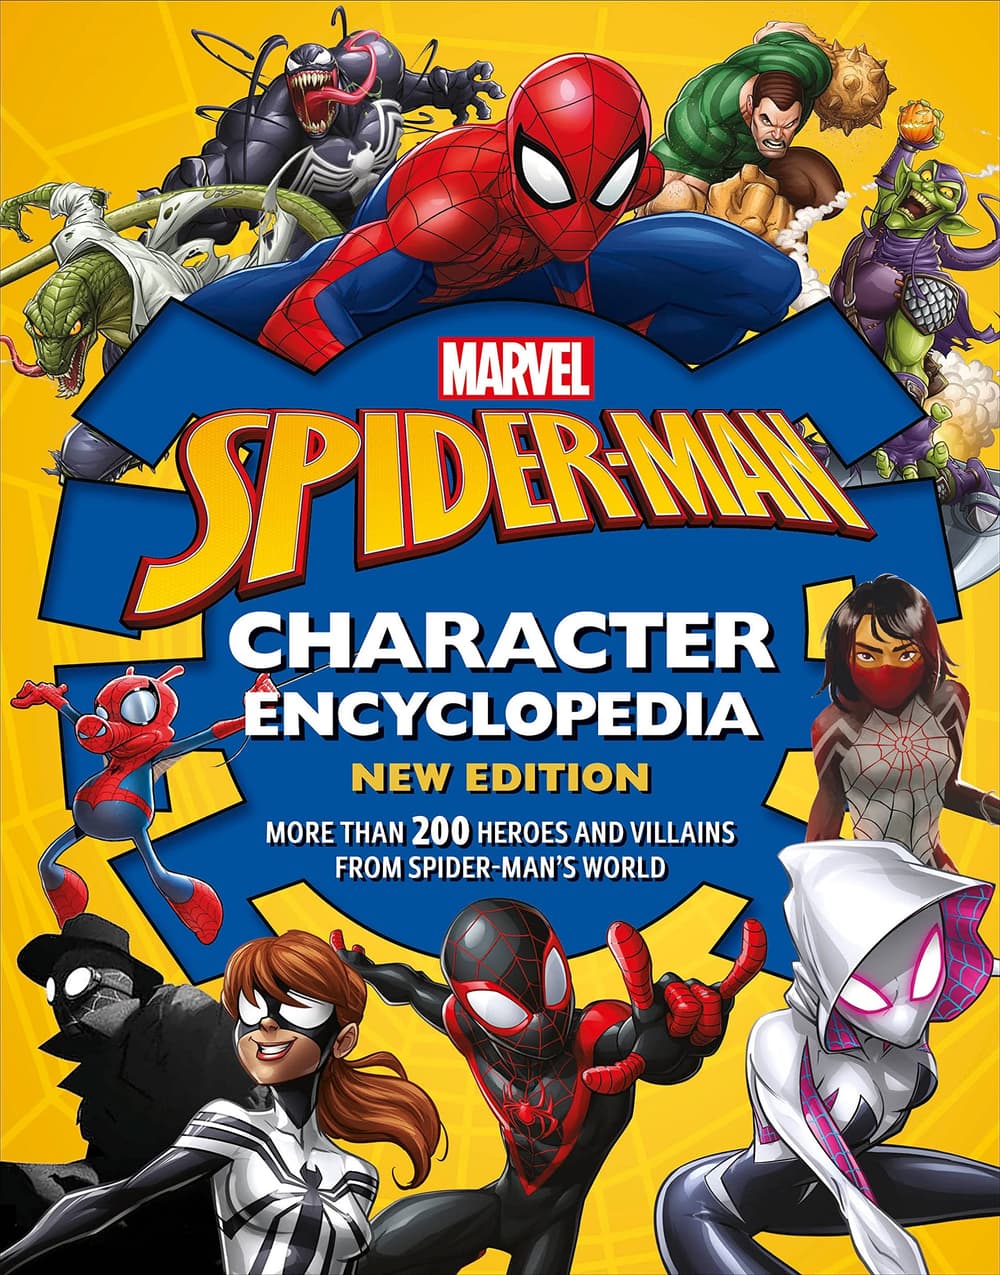 Cover to Spider-Man Character Encyclopedia New Edition.